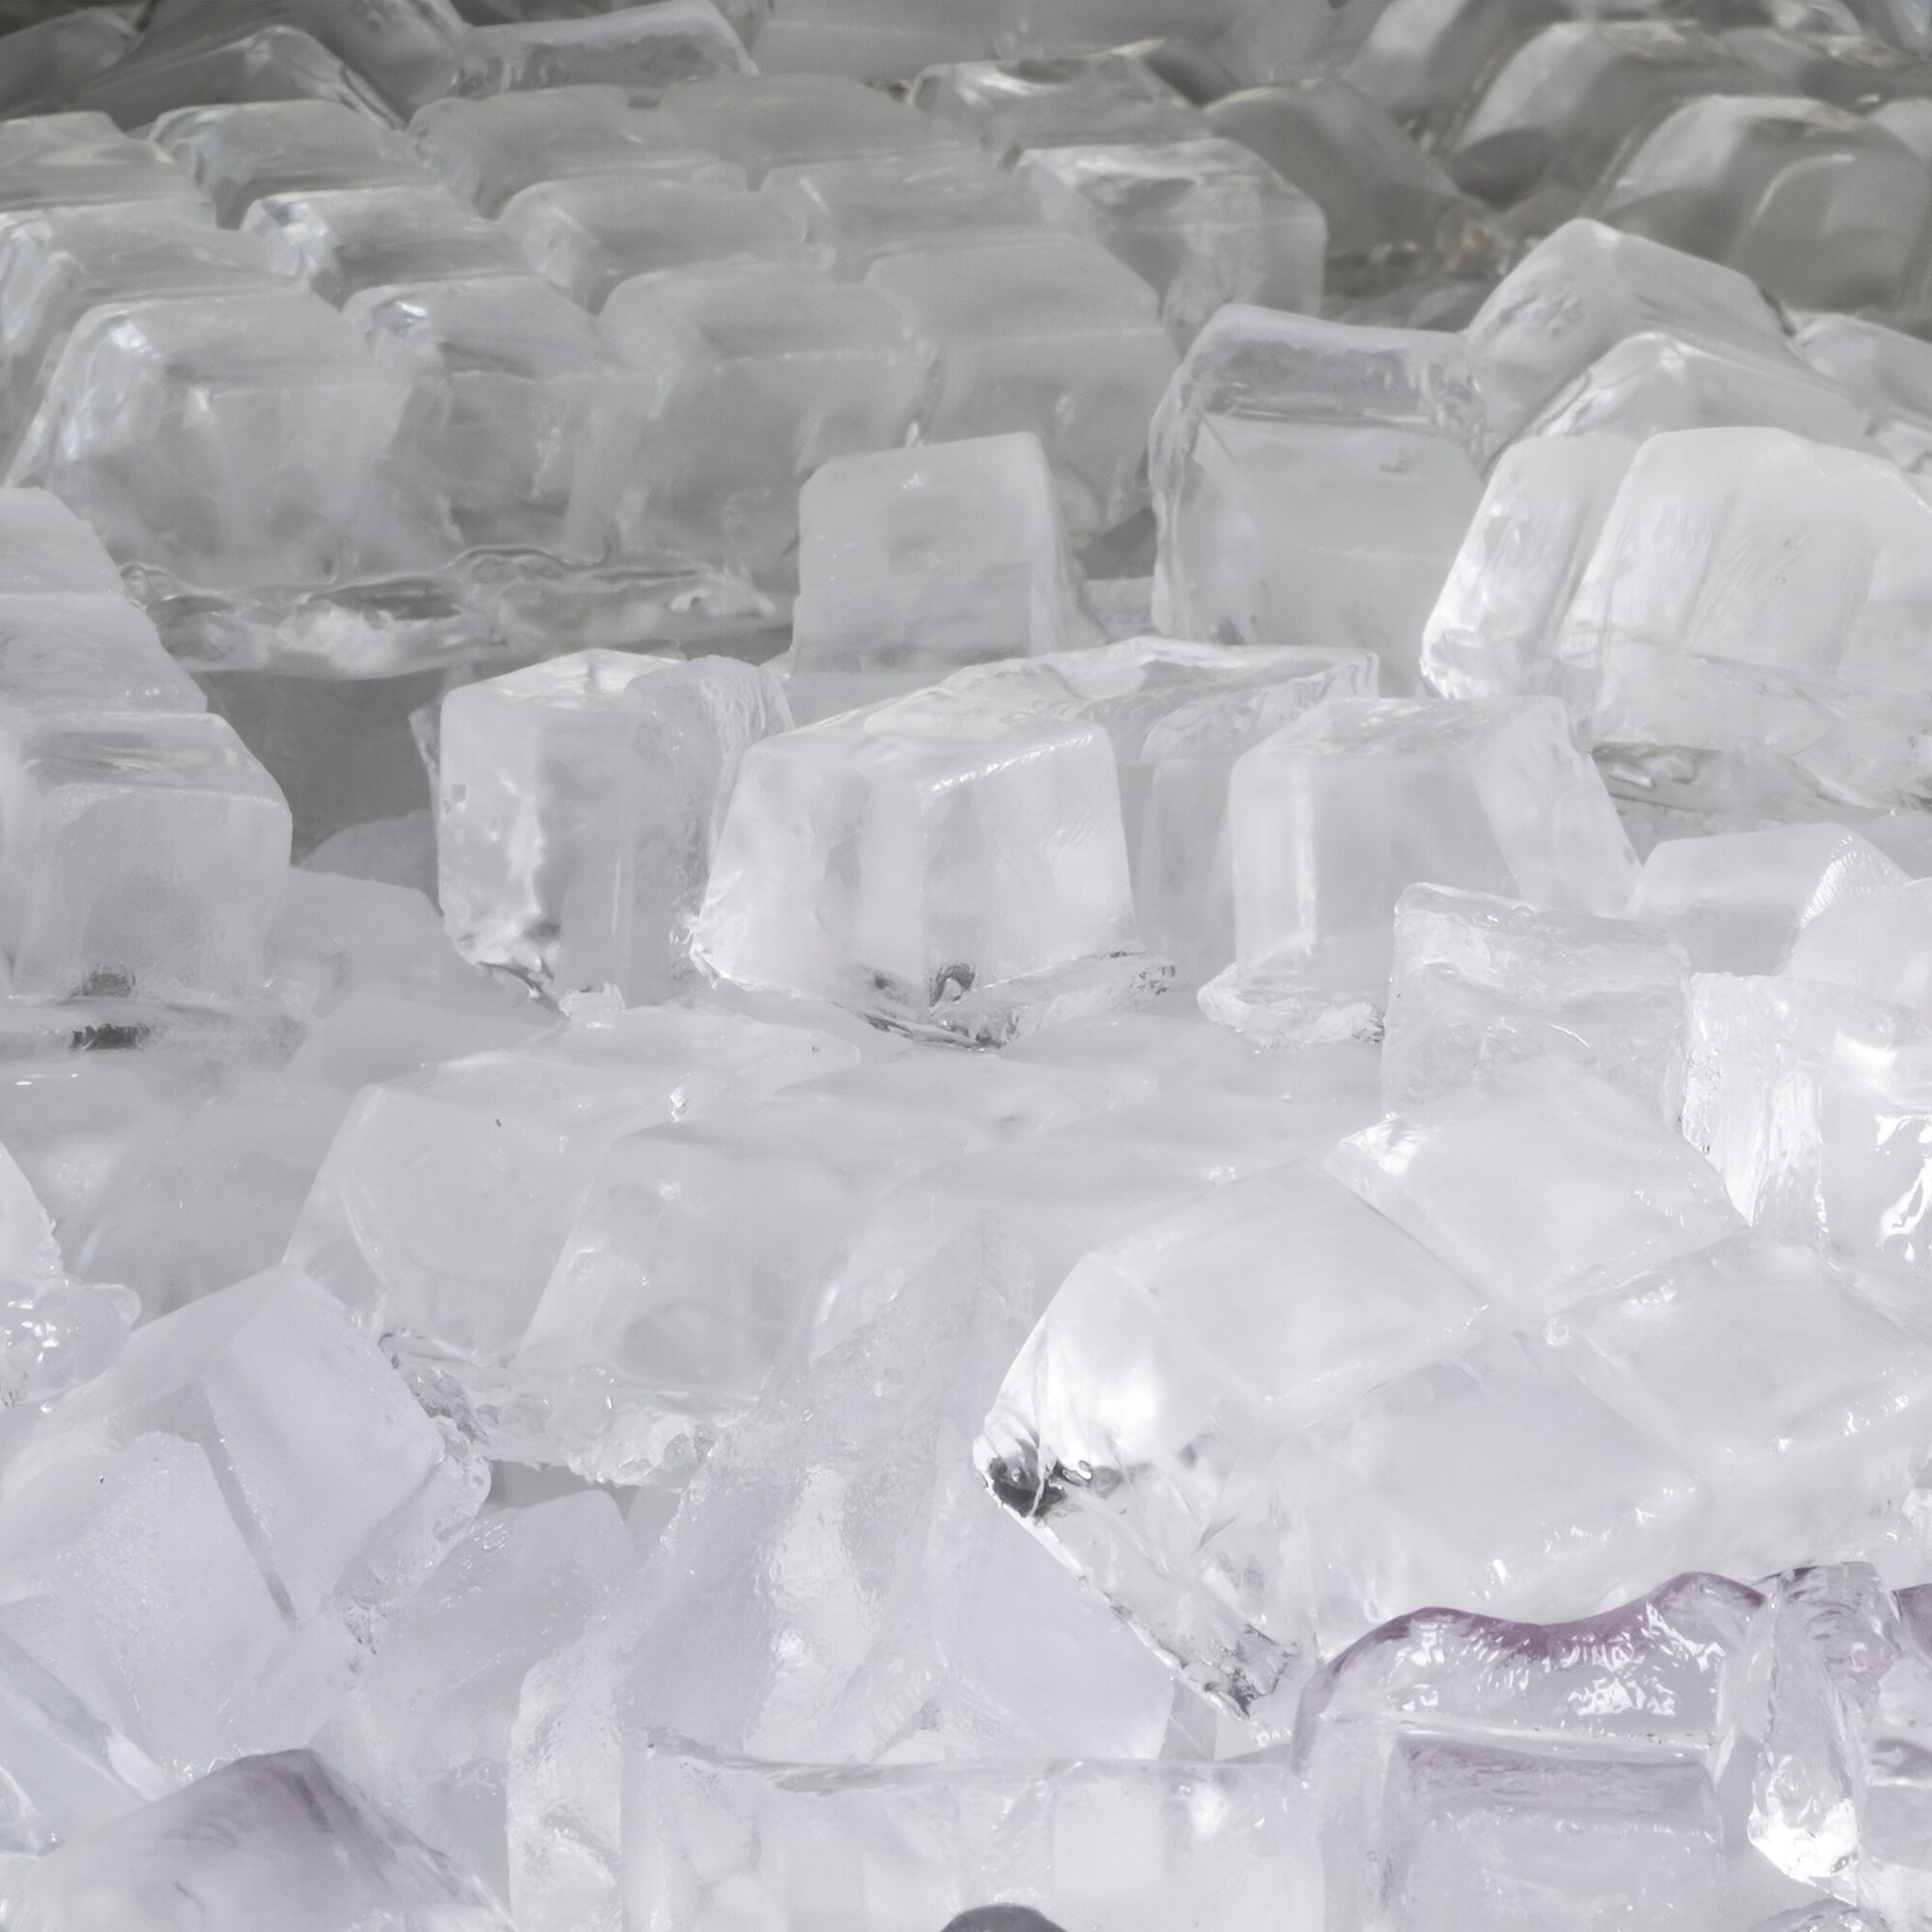 Gläce Luxury Ice Co sells perfectly square ice cubes for $325